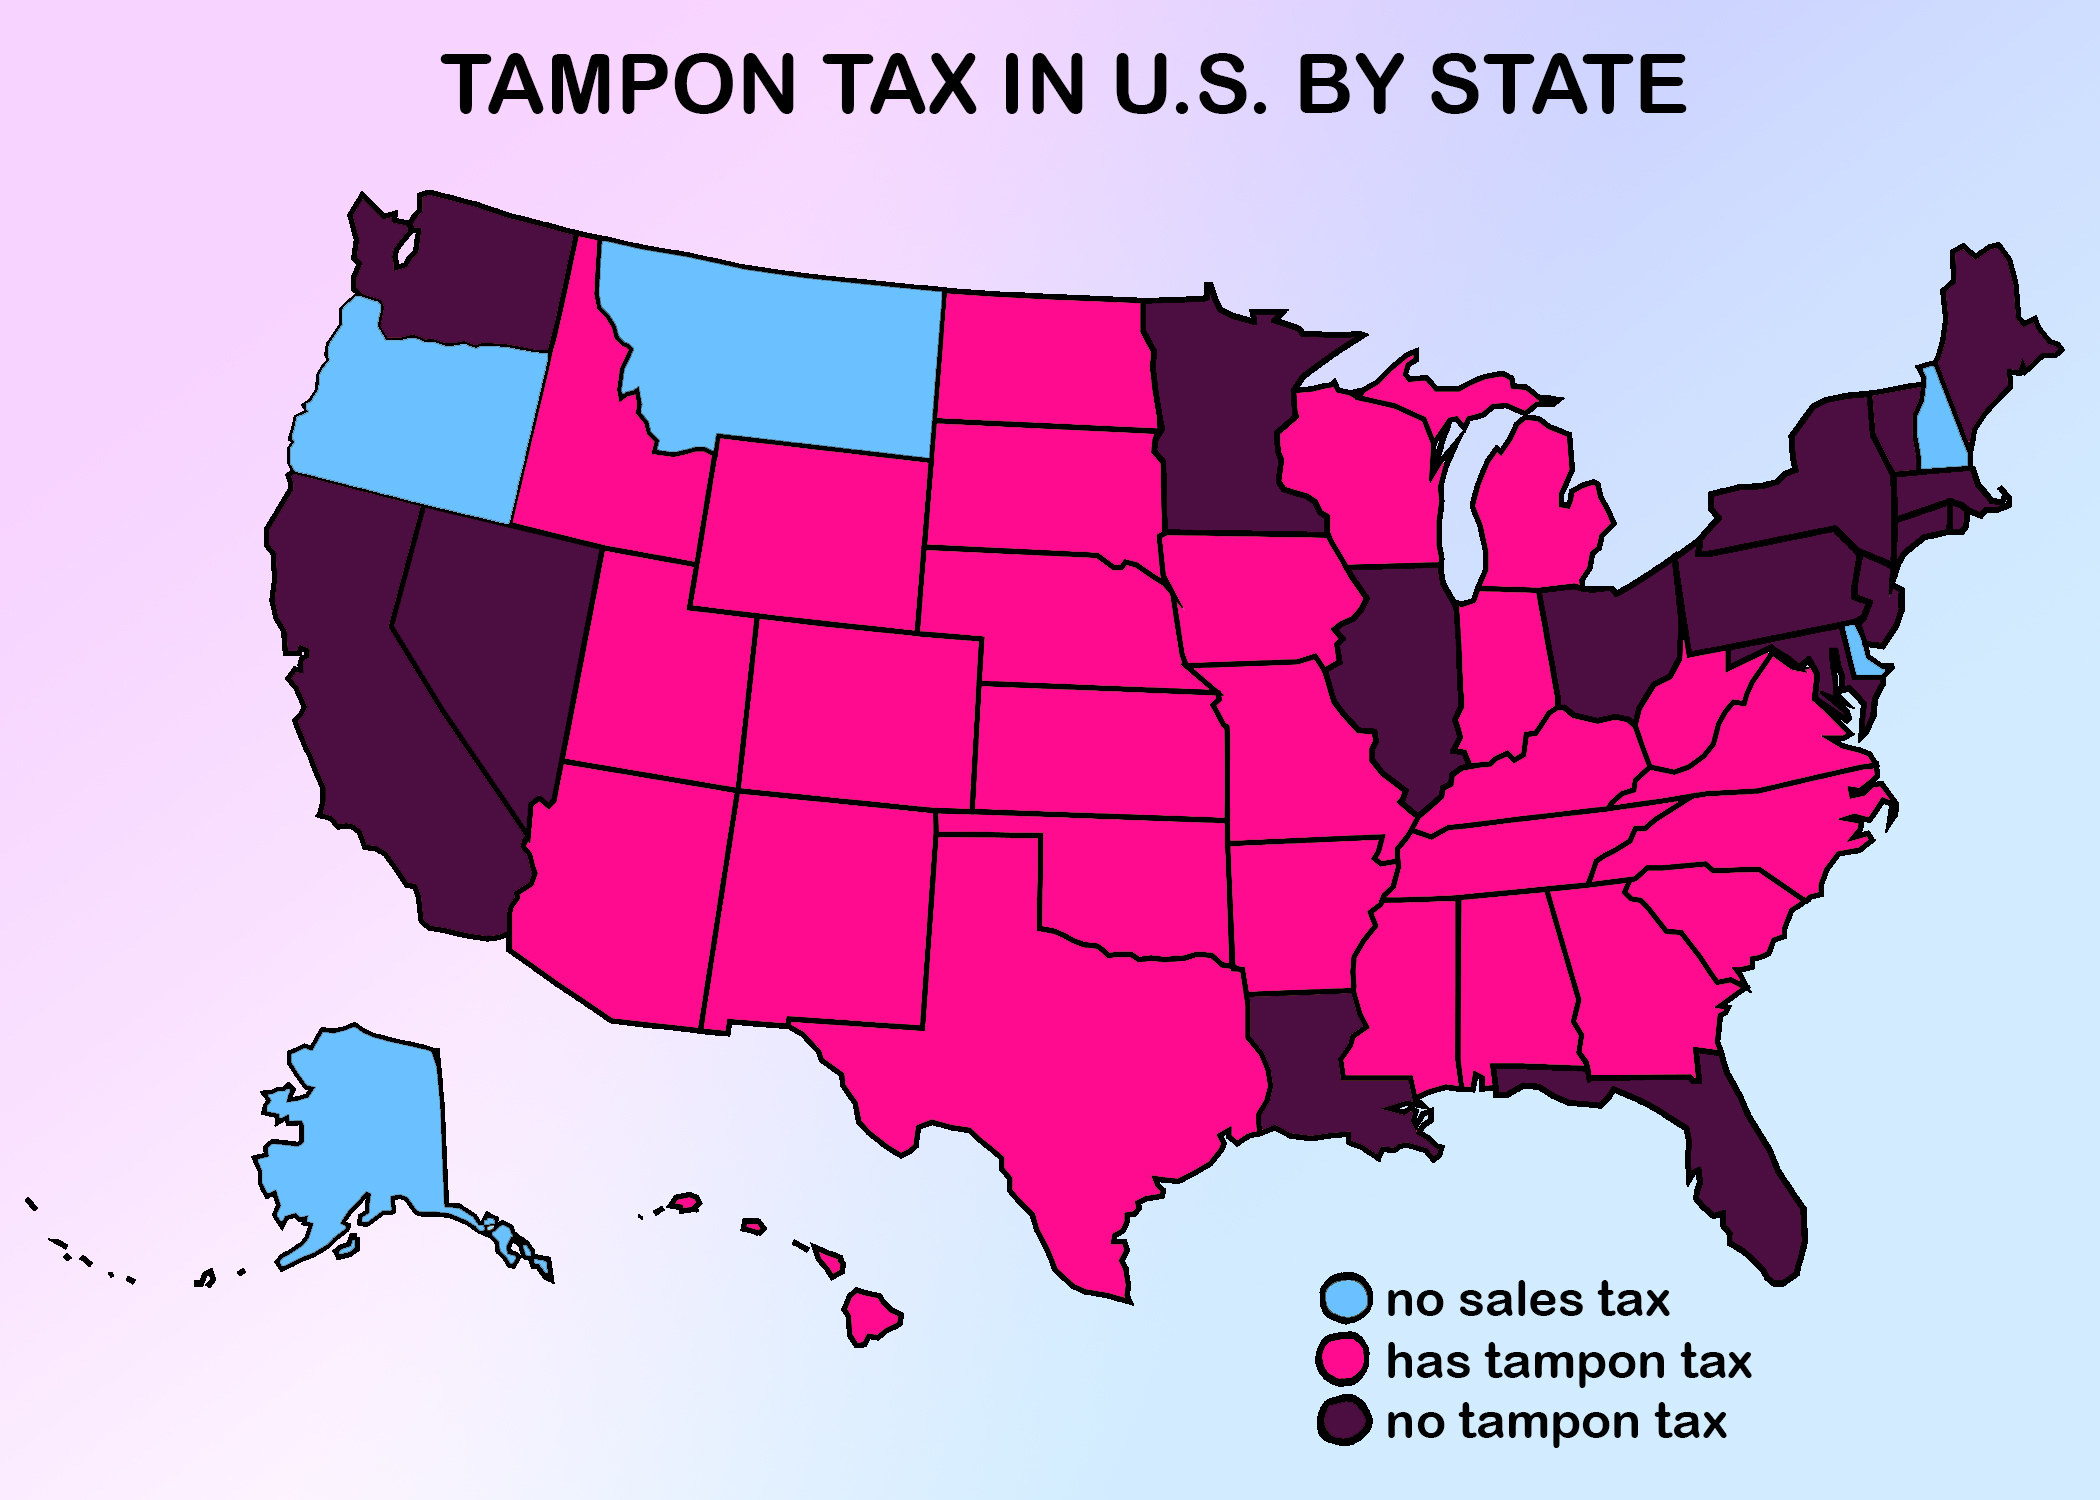 A color coded map showing the states that have no sales tax, tampon tax, and no tampon tax